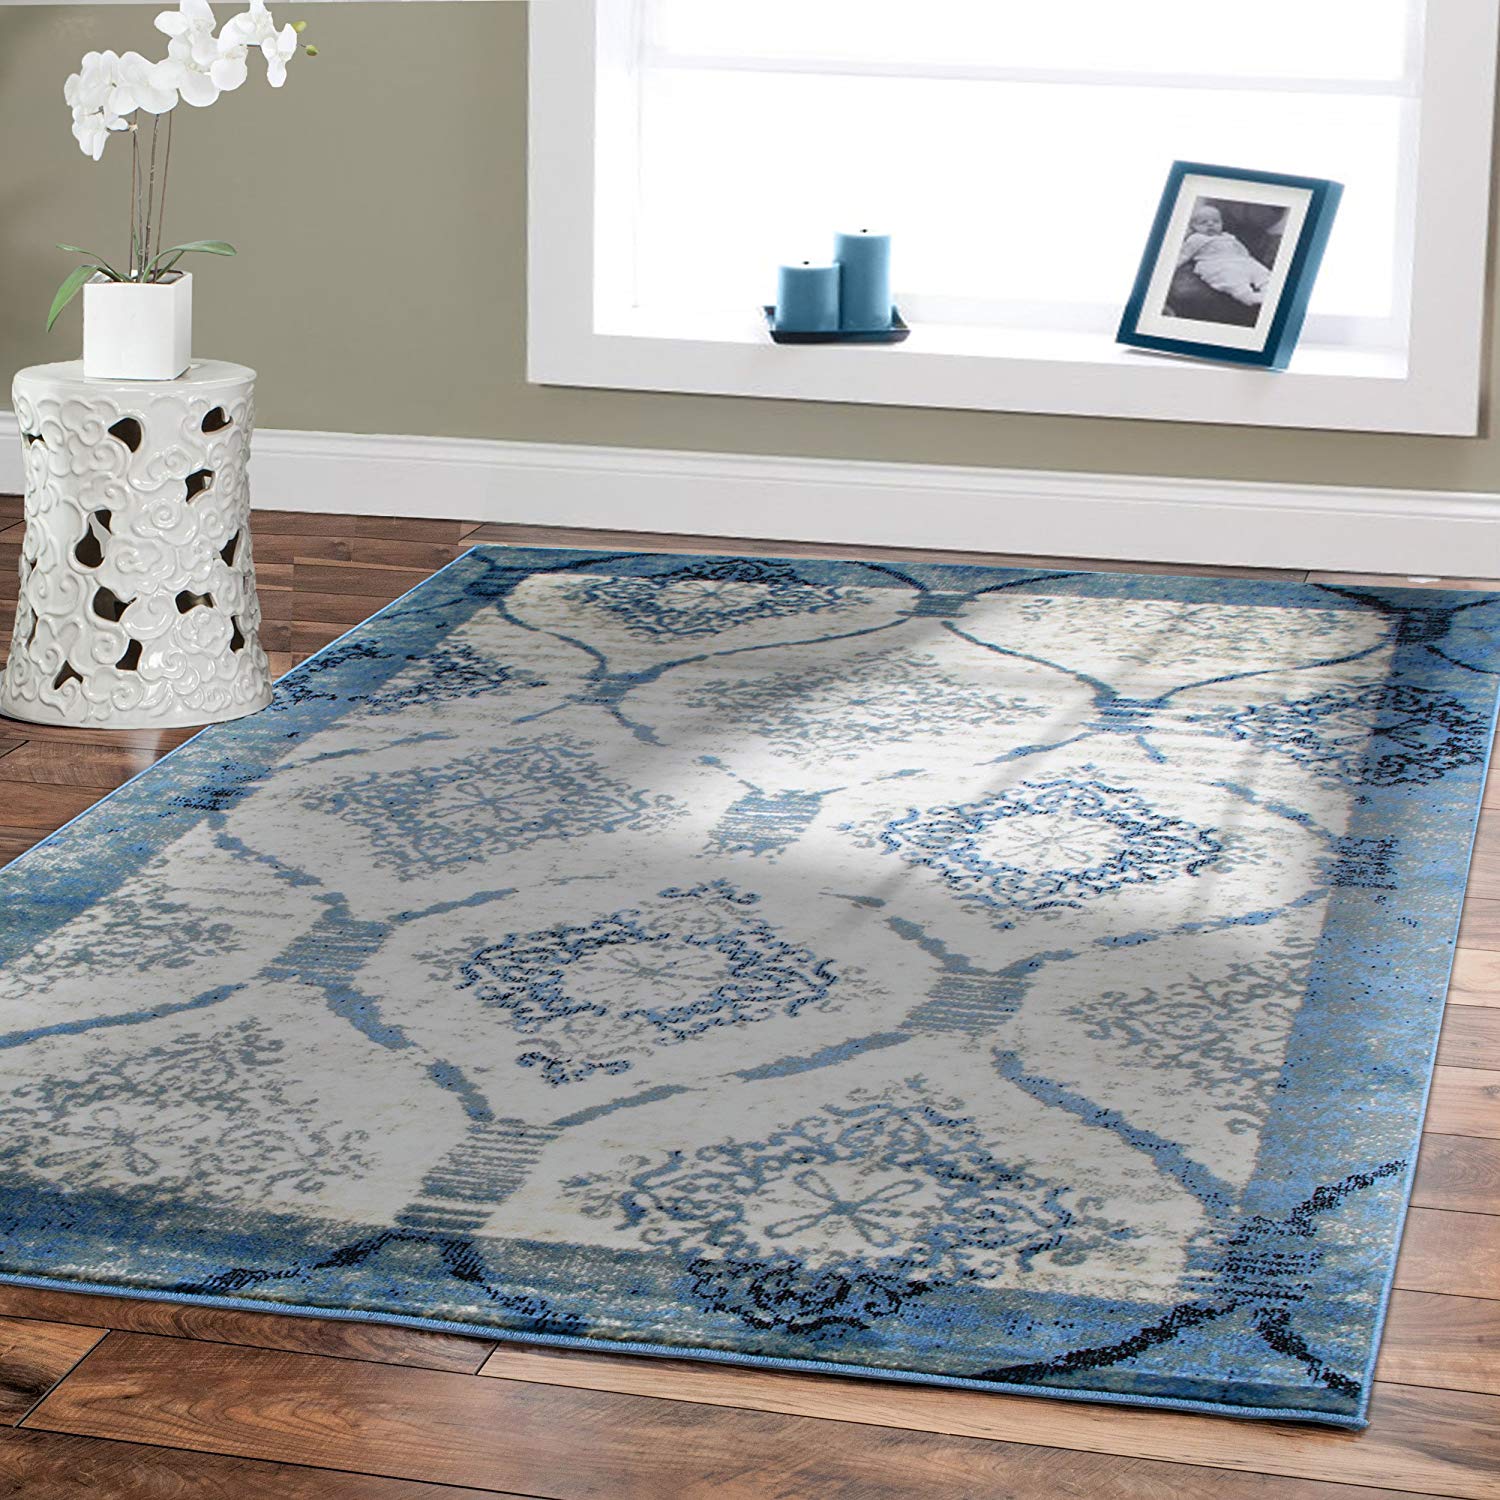 amazon.com: contemporary rugs for living room 5x8 blue area rug modern rugs AVGENOL